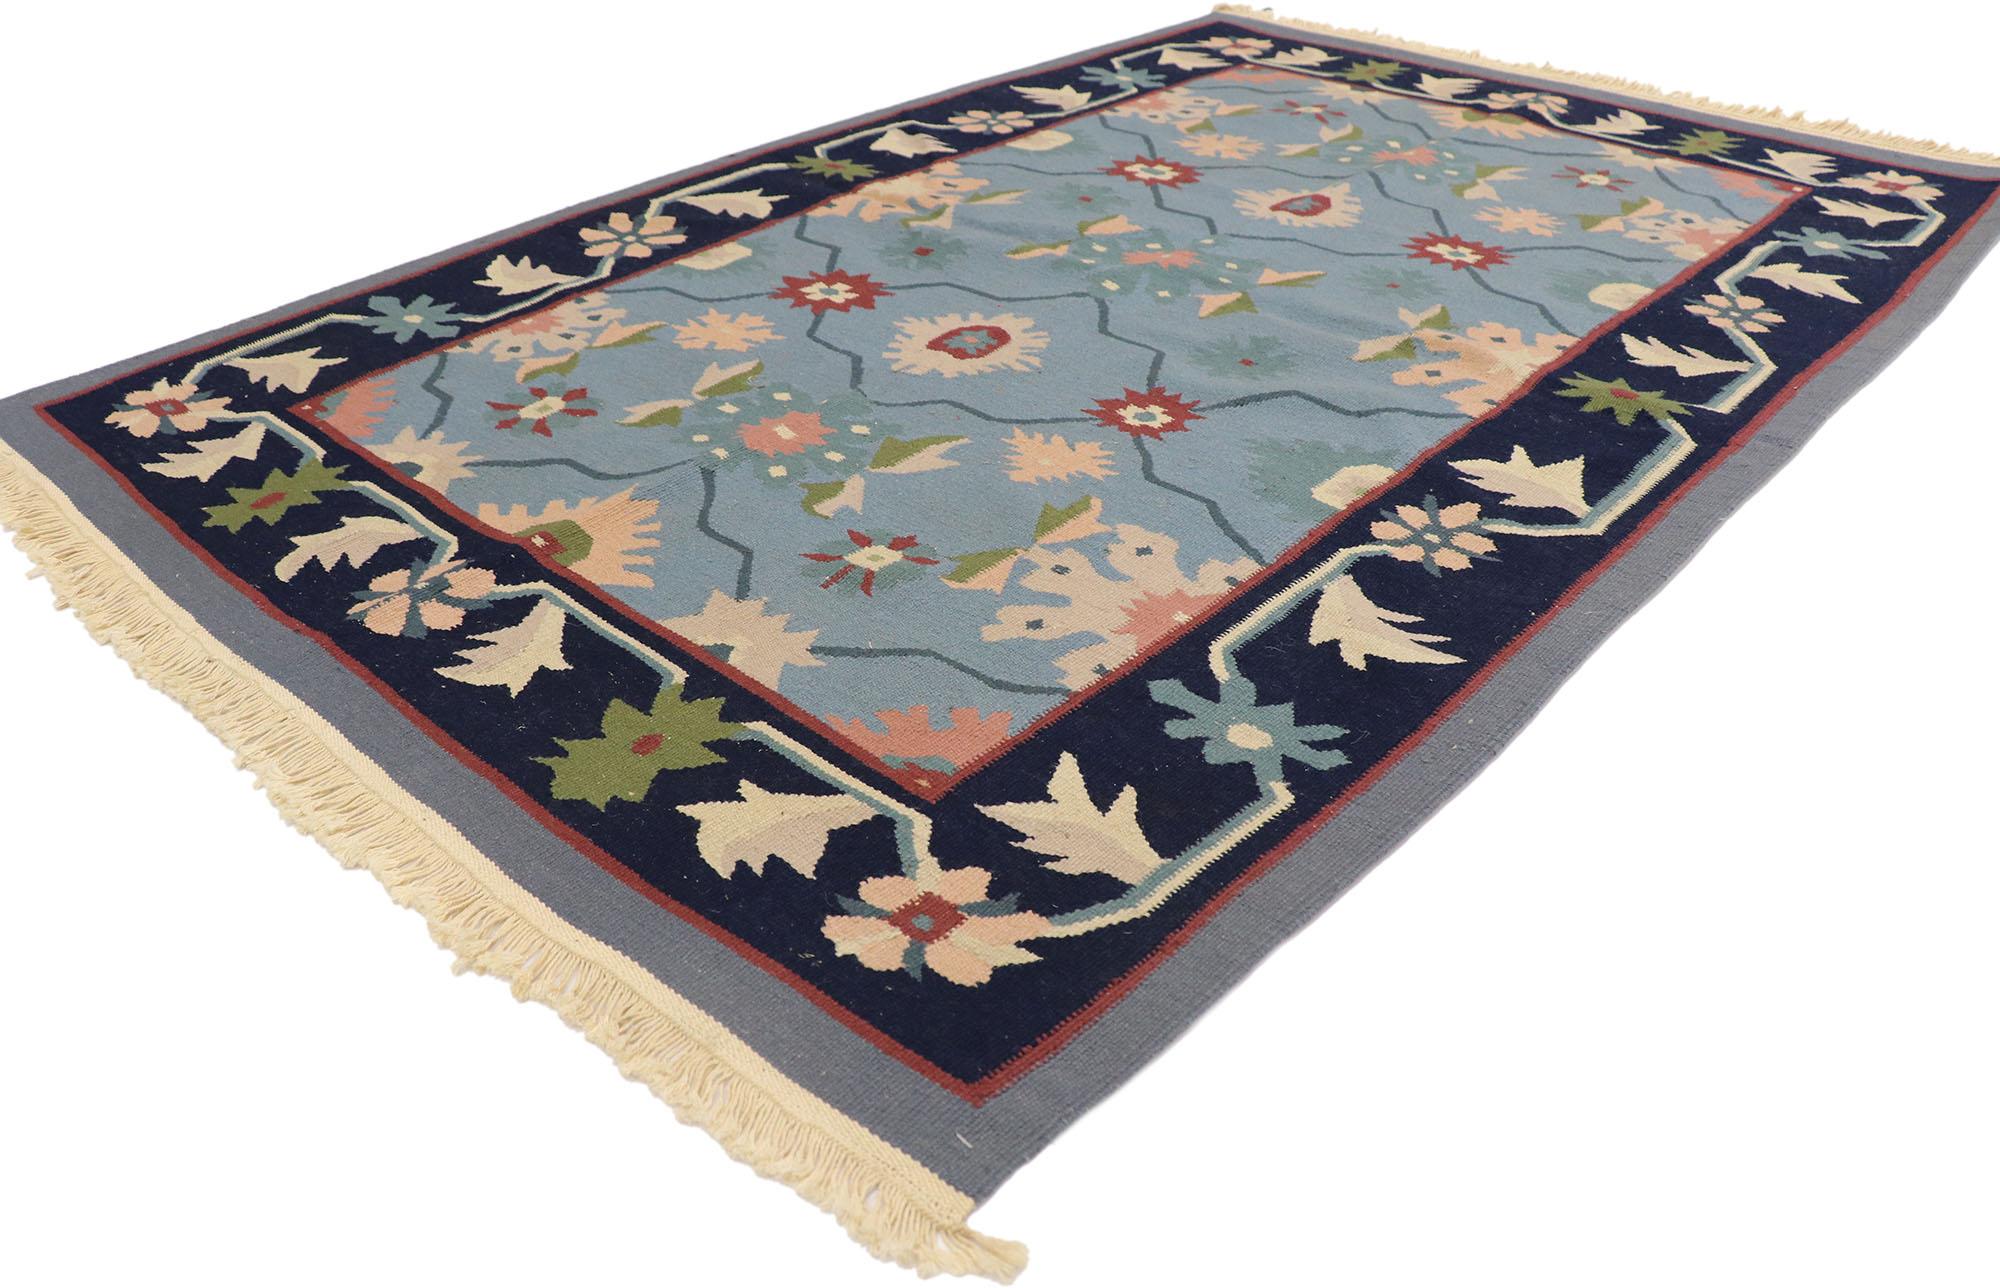 77991 Vintage Romanian Floral Kilim Rug with Folk Art Cottage Style 03'11 x 05'10. Delicately feminine and beautifully traditional, this hand-woven wool vintage Romanian floral kilim rug is poised to impress. The sky blue abrashed field features an